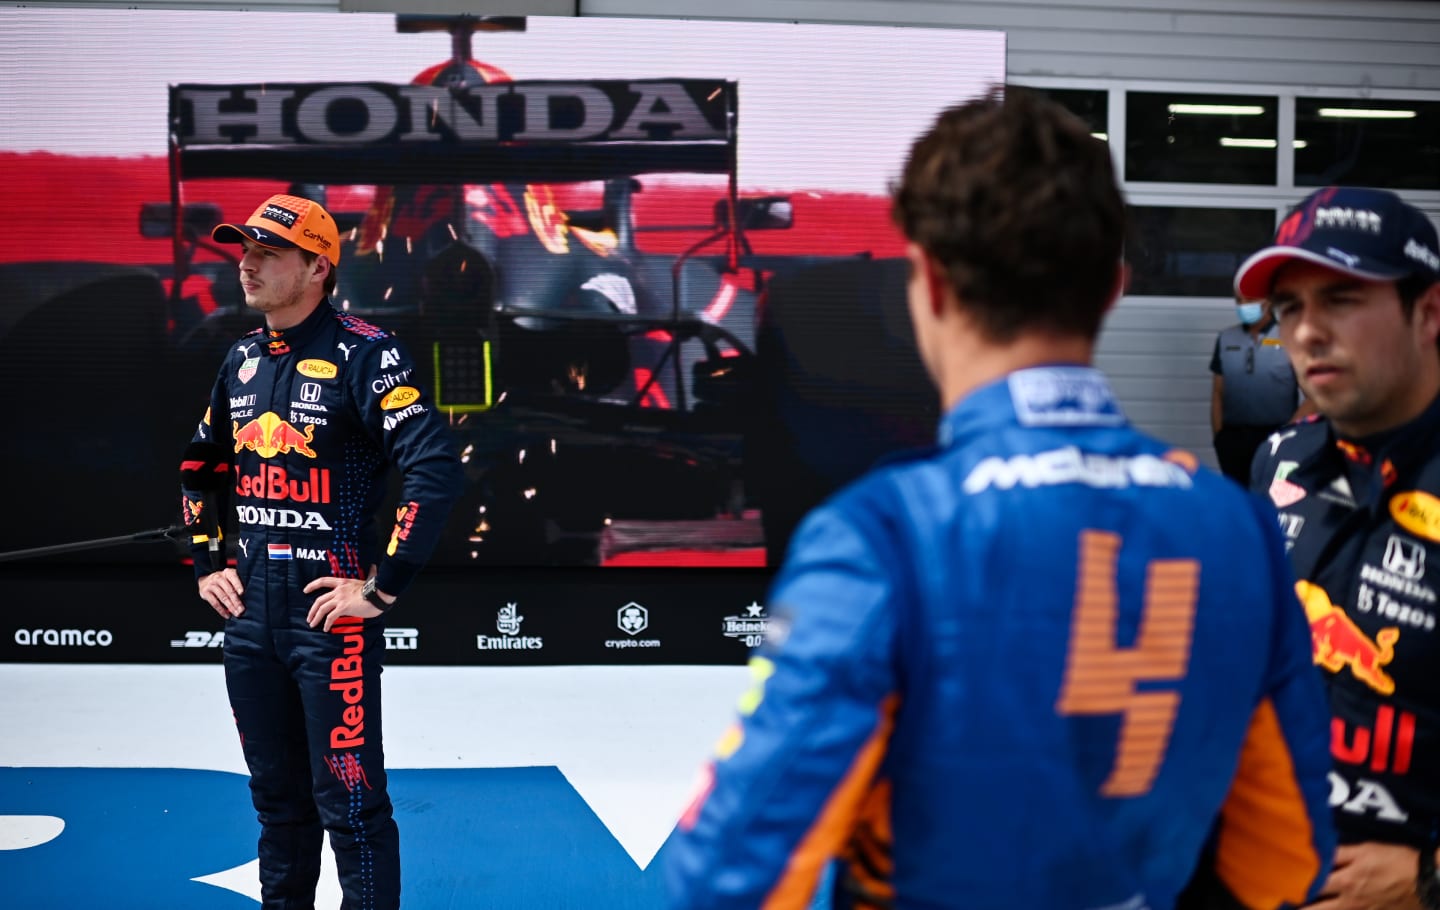 SPIELBERG, AUSTRIA - JULY 03: Pole position qualifier Max Verstappen of Netherlands and Red Bull Racing talks to the media in parc ferme during qualifying ahead of the F1 Grand Prix of Austria at Red Bull Ring on July 03, 2021 in Spielberg, Austria. (Photo by Christian Bruna - Pool/Getty Images)